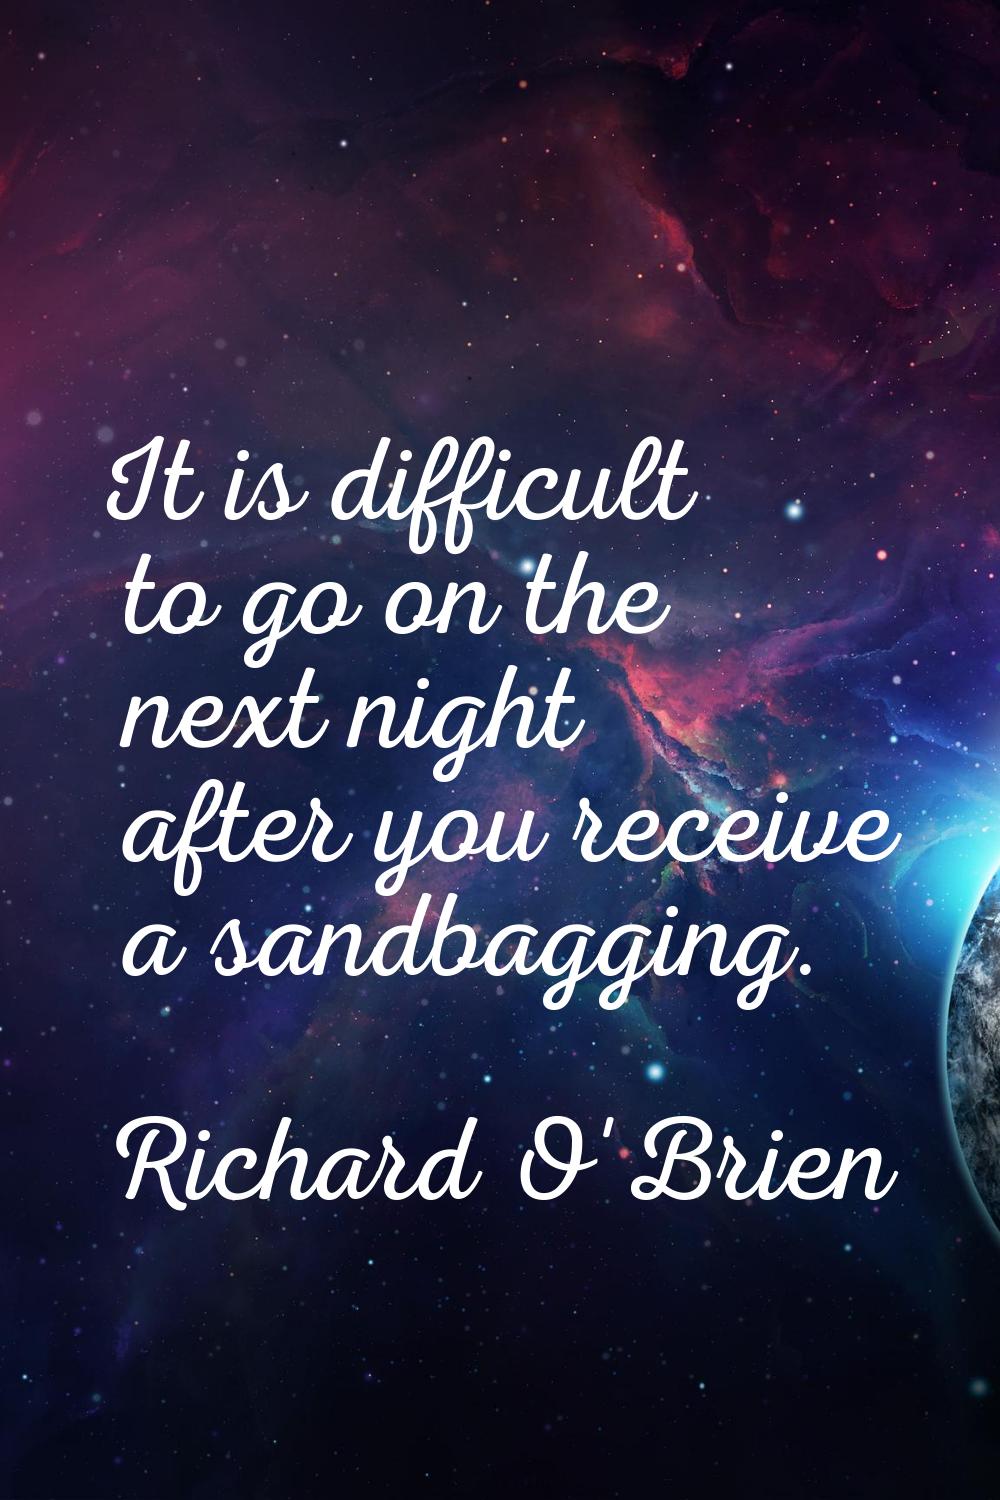 It is difficult to go on the next night after you receive a sandbagging.